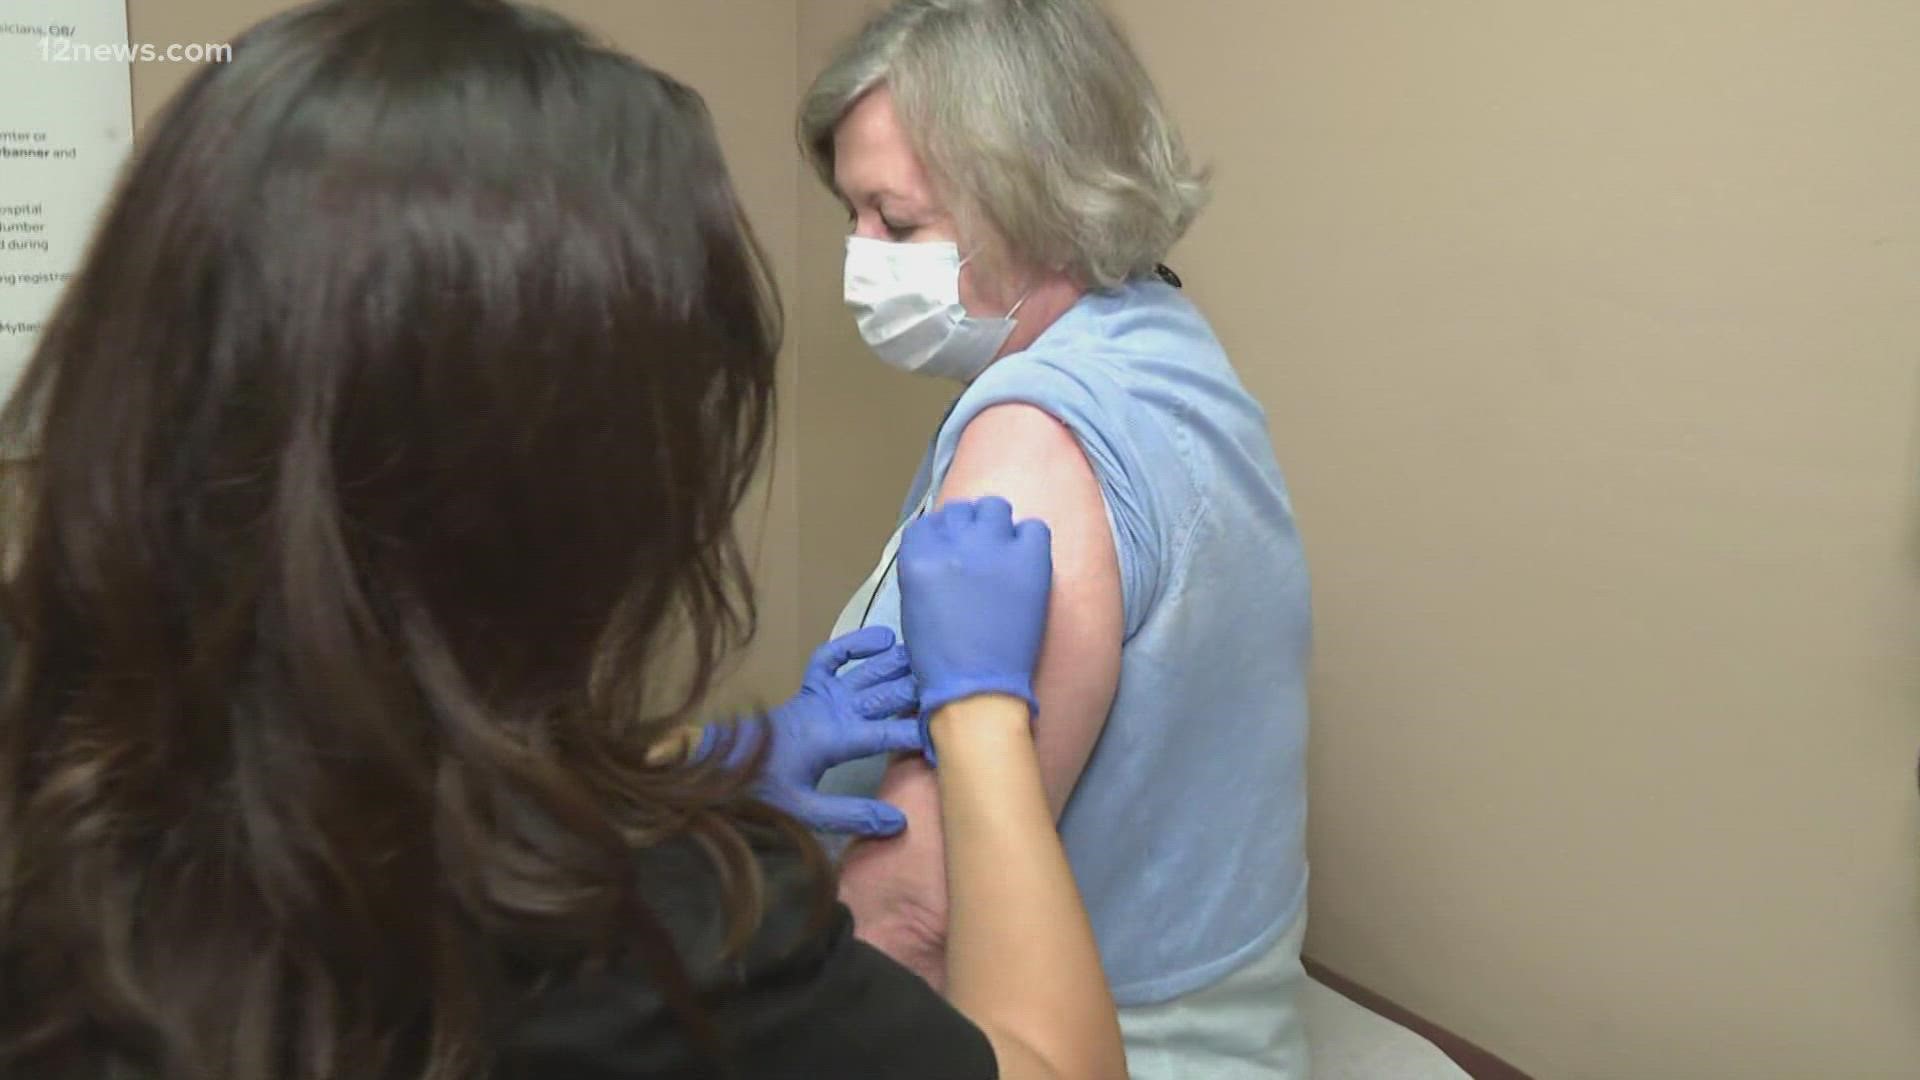 Within days many Arizonans could lose their jobs if they don't get the COVID-19 vaccine. Some are seeking religious exemptions from the vaccine.